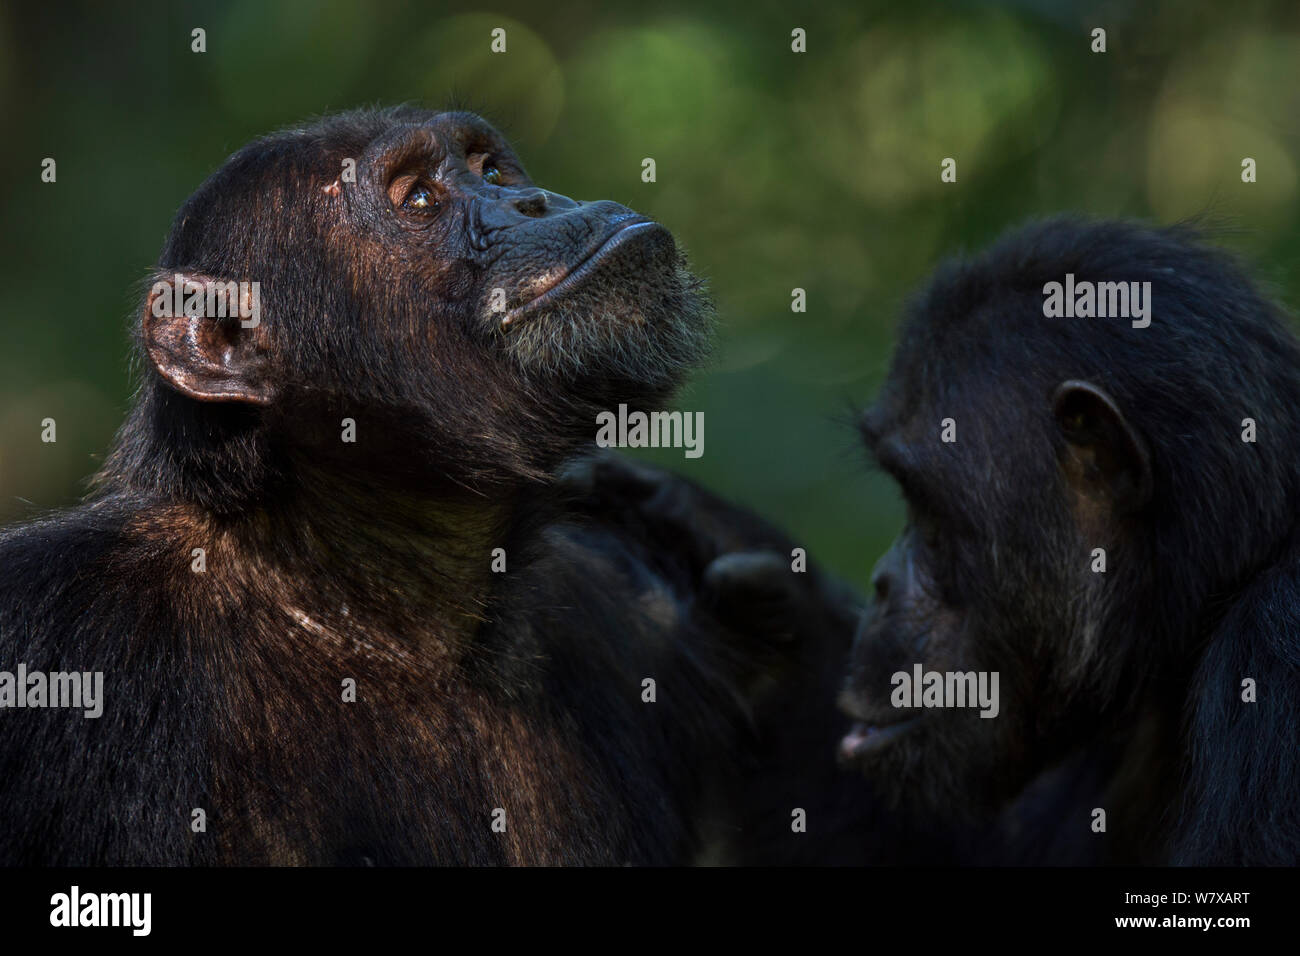 Eastern chimpanzee (Pan troglodytes schweinfurtheii) male &#39;Titan&#39; aged 17 years being groomed by alpha male &#39;Ferdinand&#39; aged 19 years. Gombe National Park, Tanzania. Stock Photo